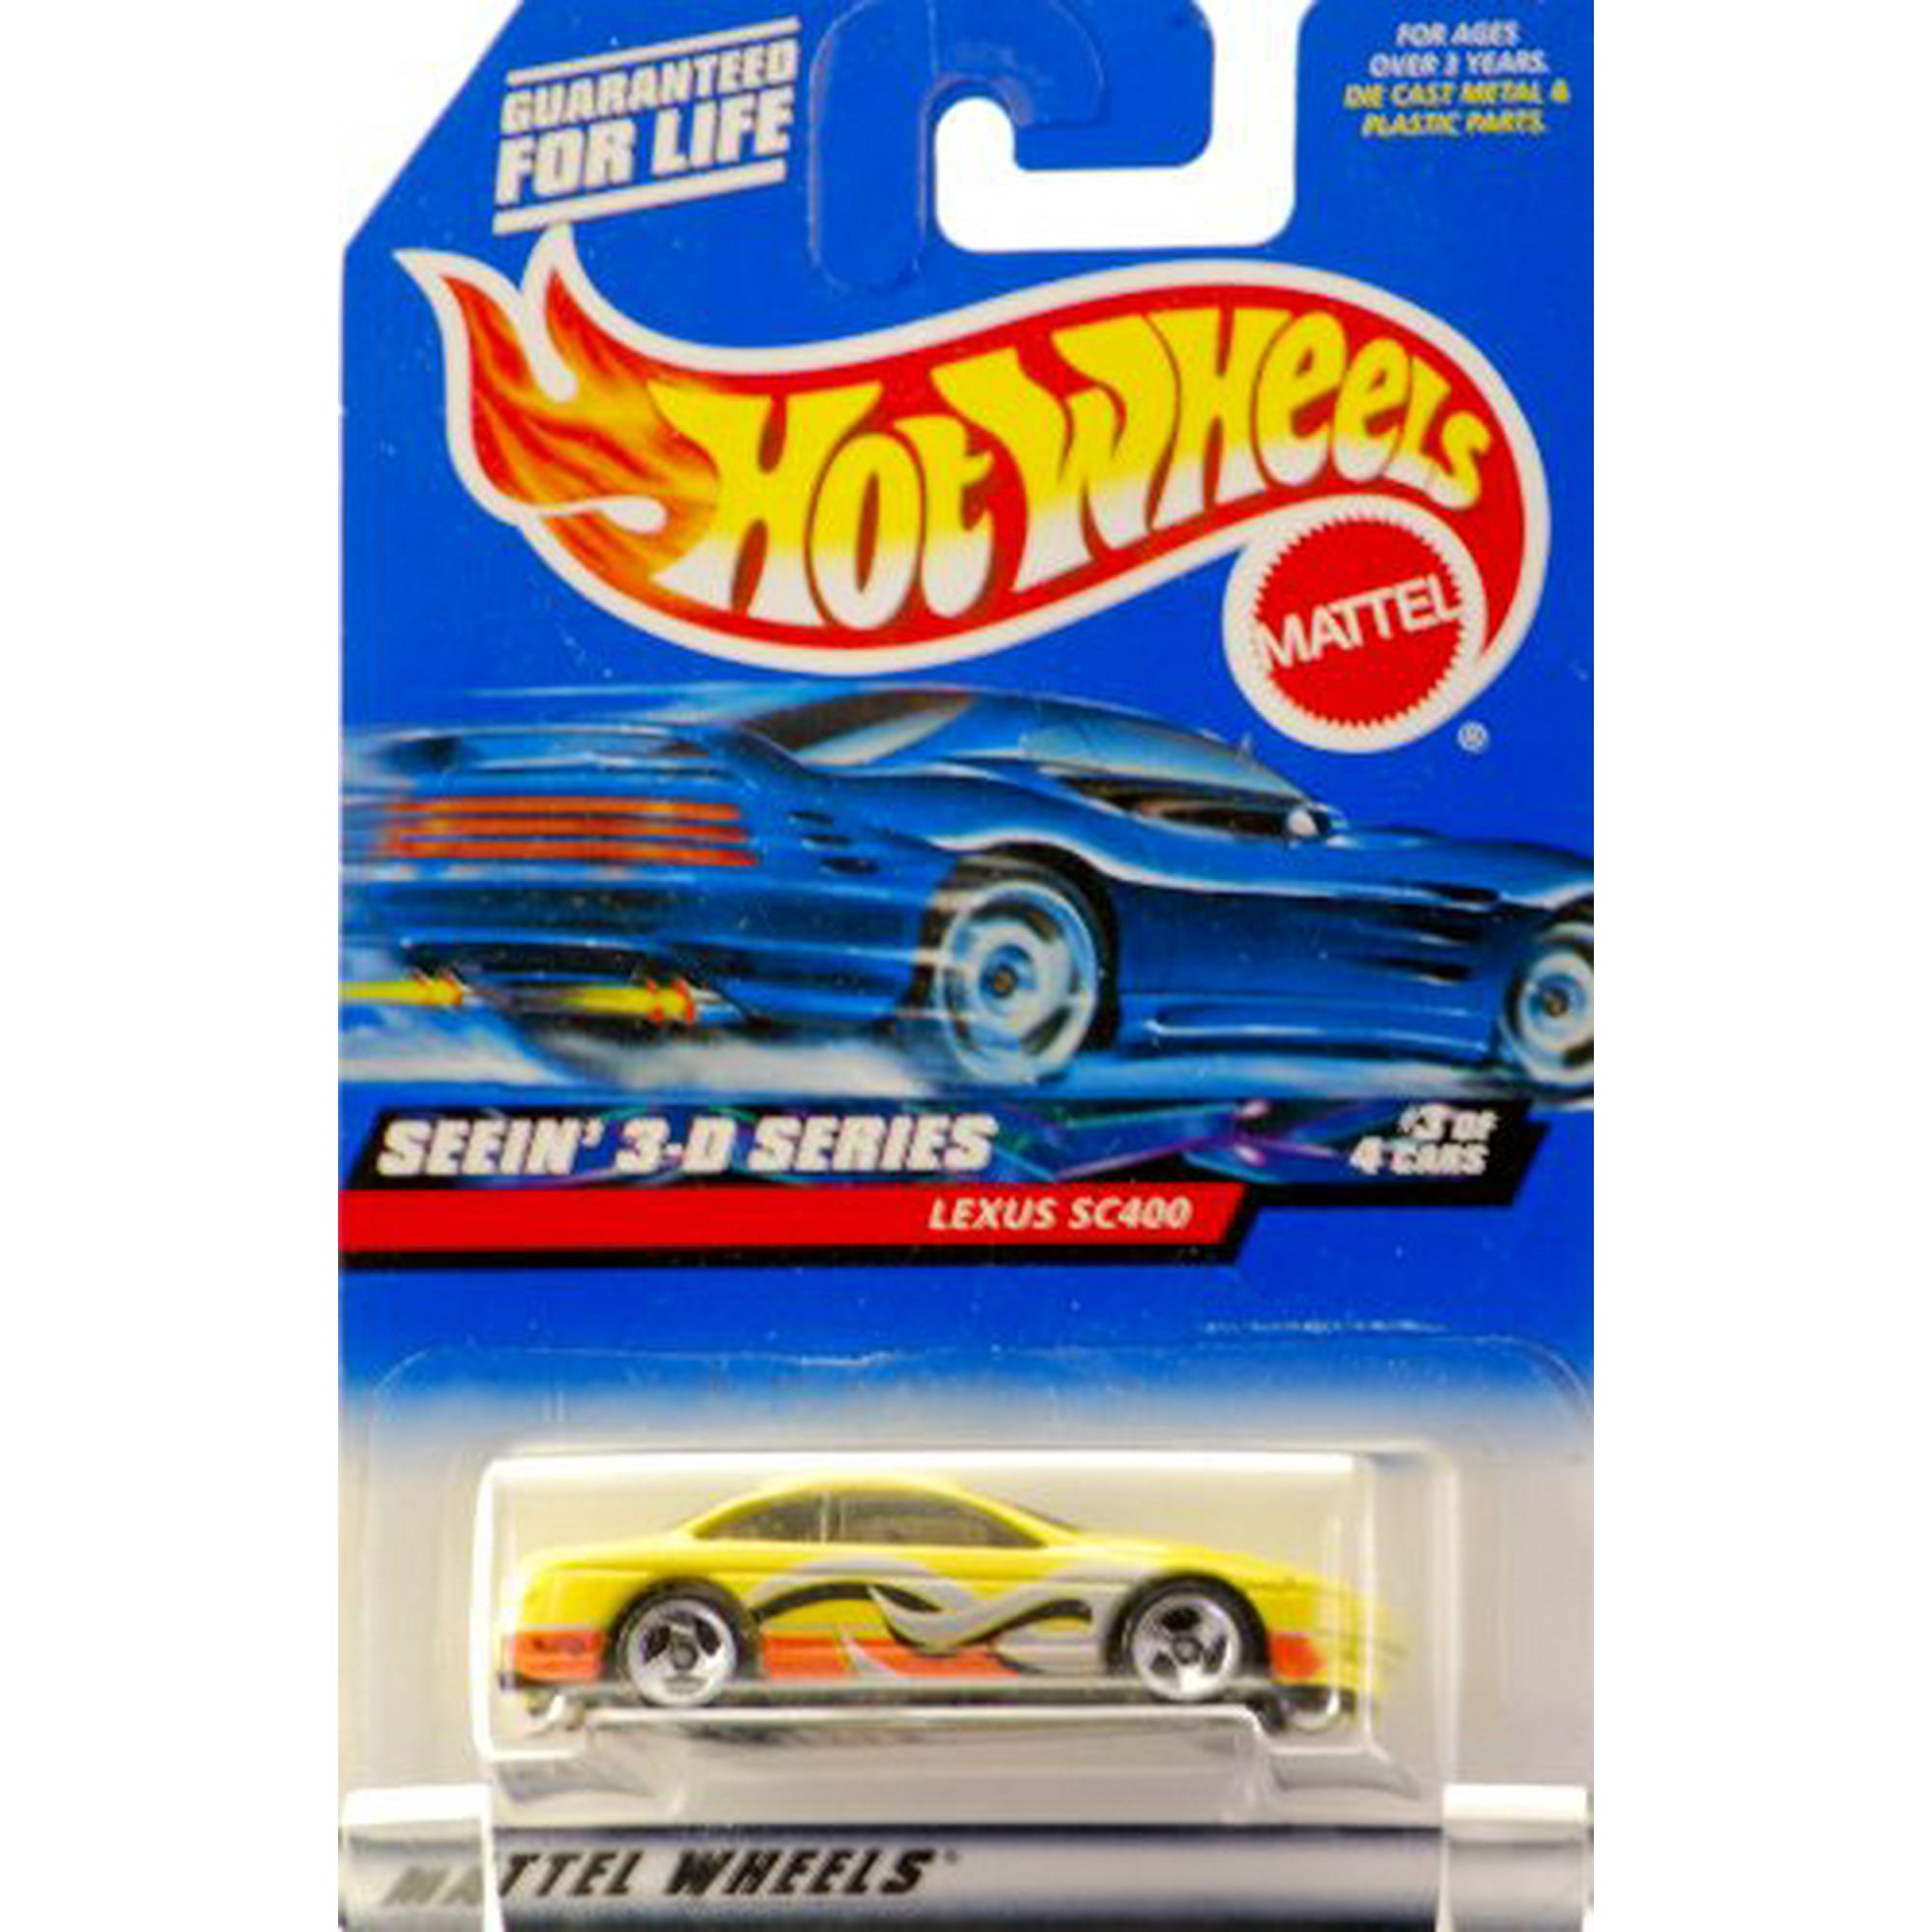 Out of Production Lexus SC400 Hot Wheels 2000 Showroom Wheels Yellow / Orange Tinted Windows Collector #011 Seein 3-D Series #3 of 4 Wave Graphics Collectible Limited Edition New Mattel 